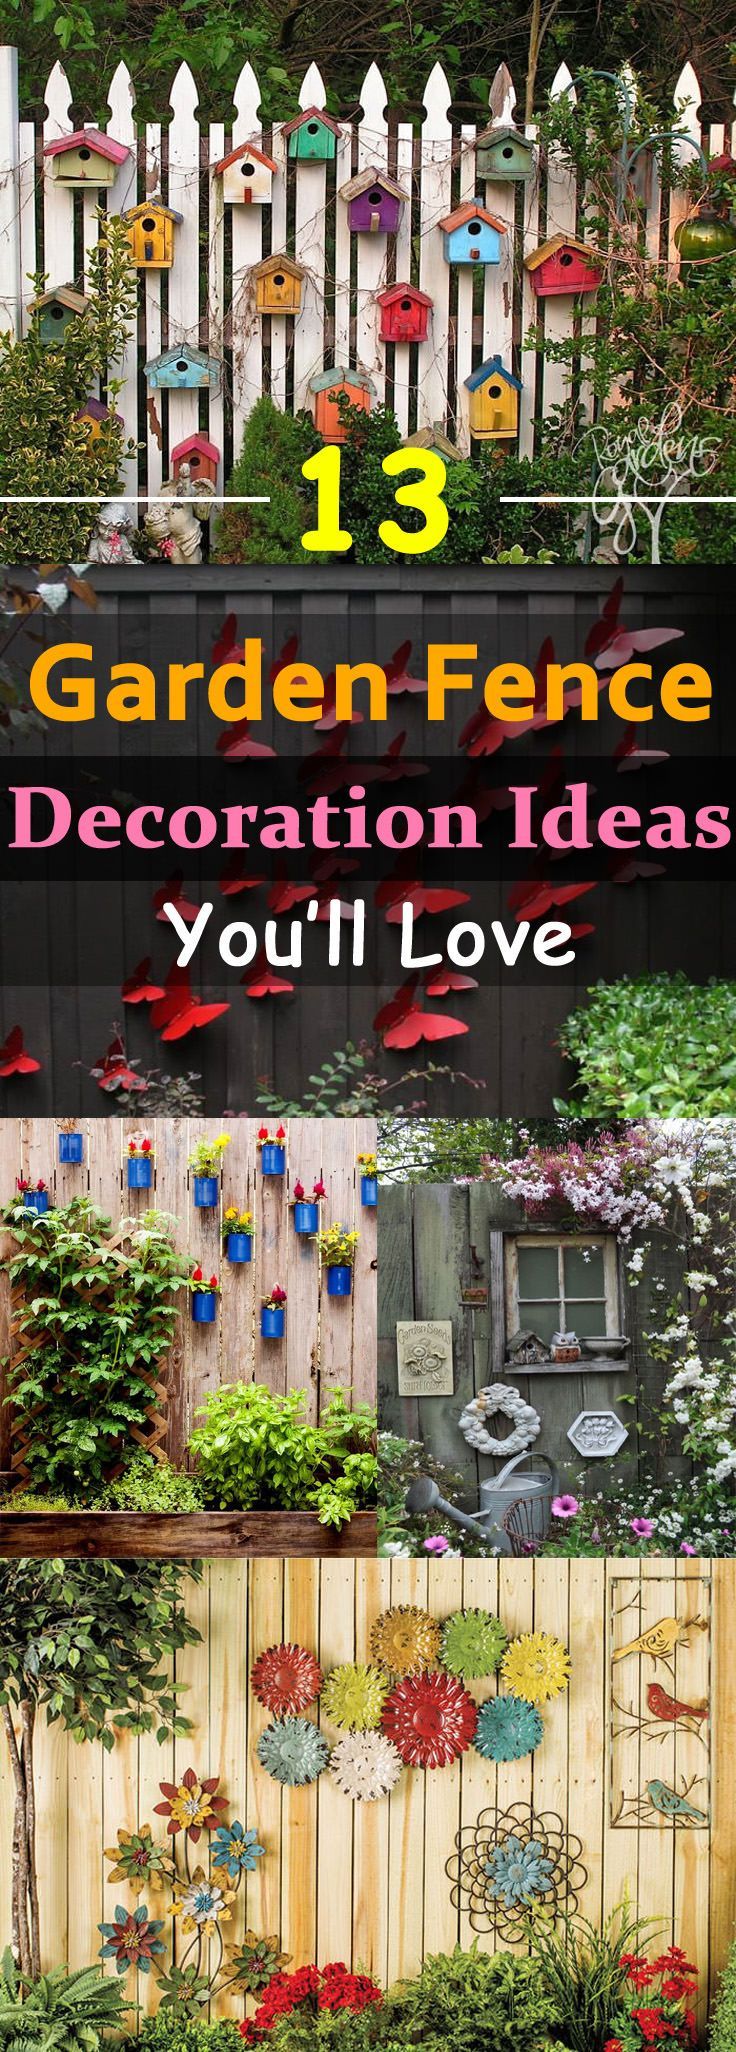 You can beautify your garden by customizing your garden fences, here we’ve 13 garden fence decoration ideas for you to follow.